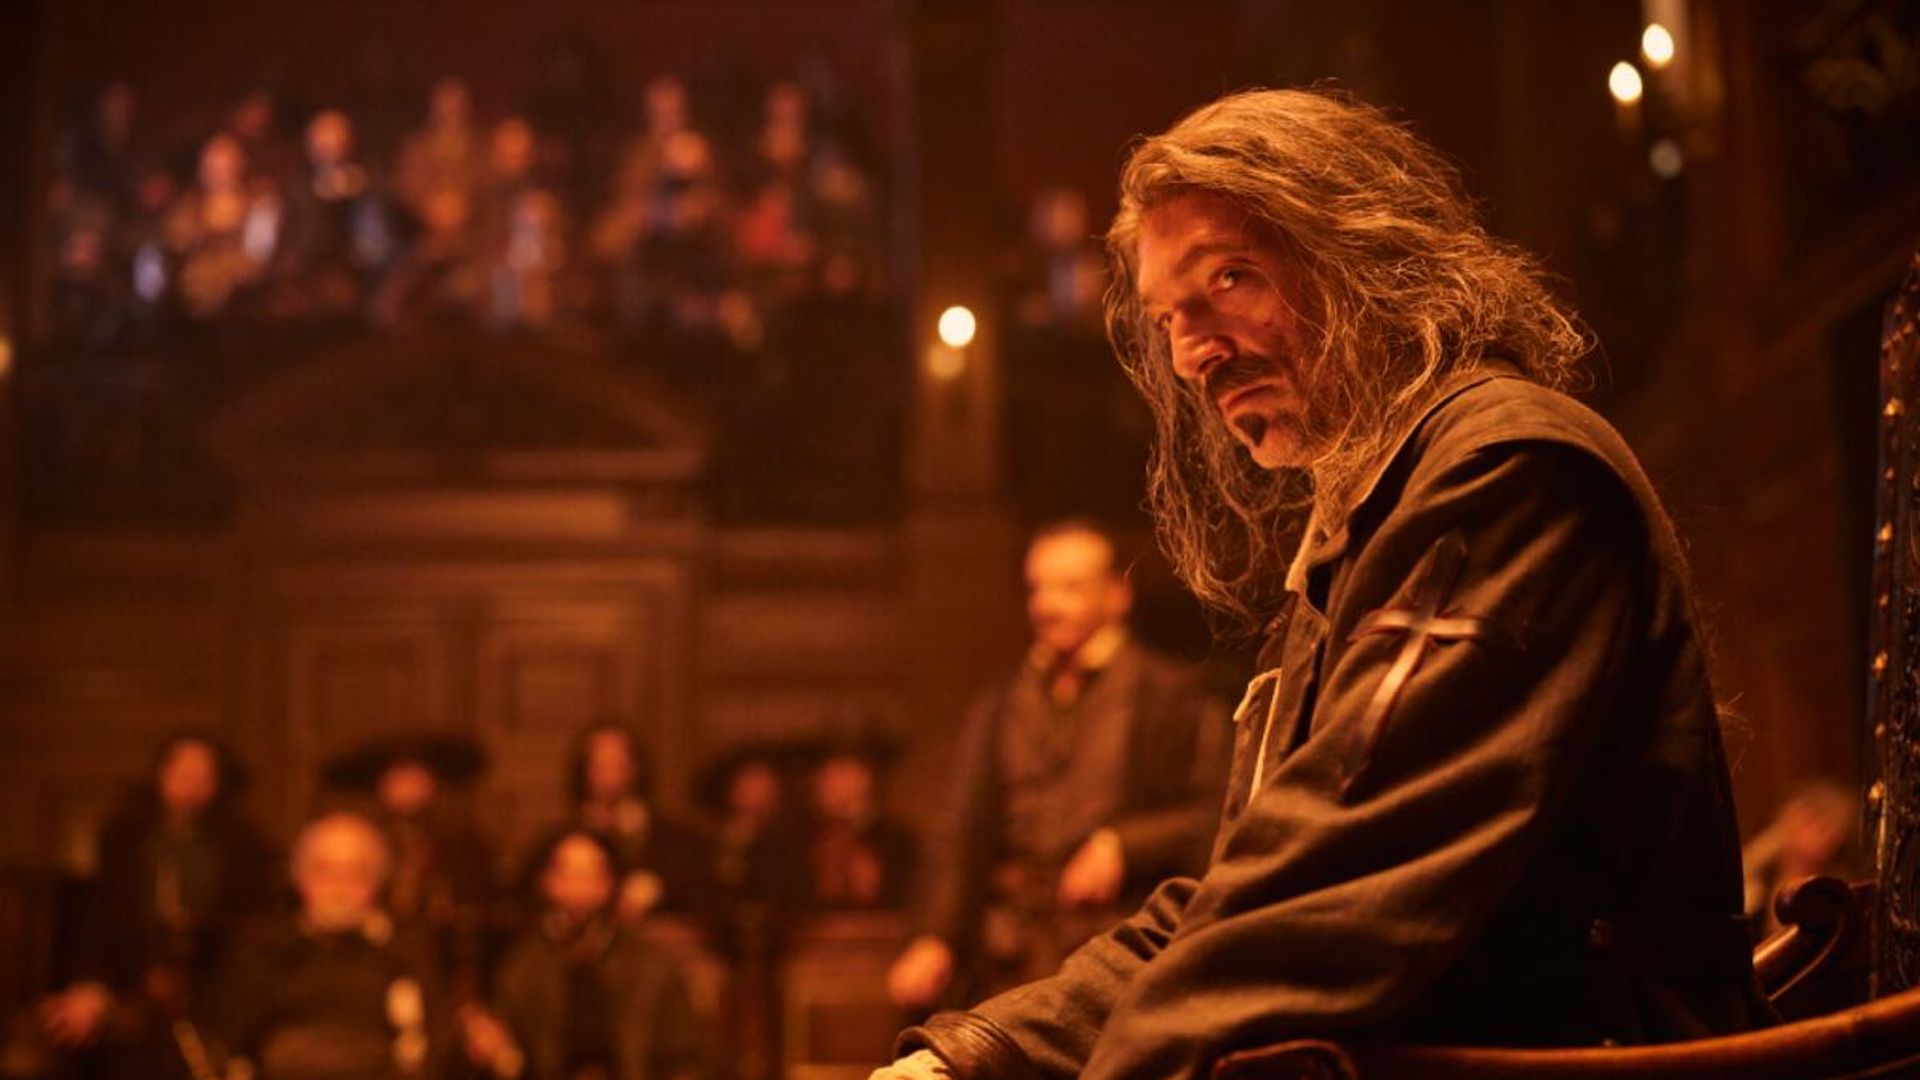 Vincent Cassel's portrayal of Athos diverges significantly from the original